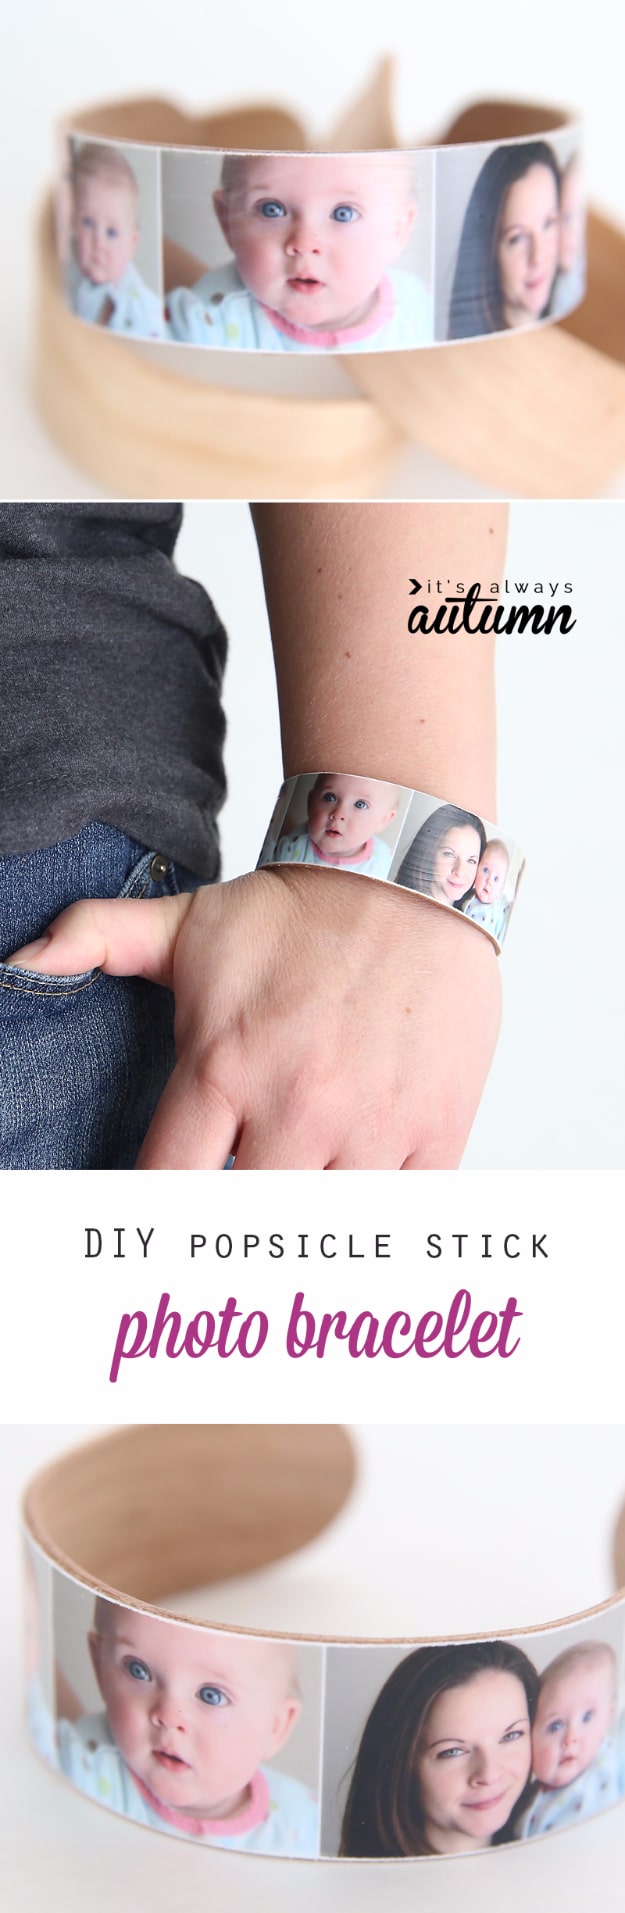 DIY Photo Crafts and Projects for Pictures - DIY Popsicle Stick Photo Bracelet - Handmade Picture Frame Ideas and Step by Step Tutorials for Making Cool DIY Gifts and Home Decor - Cheap and Easy Photo Frames, Creative Ways to Frame and Mount Photos on Canvas and Display Them In Your House 